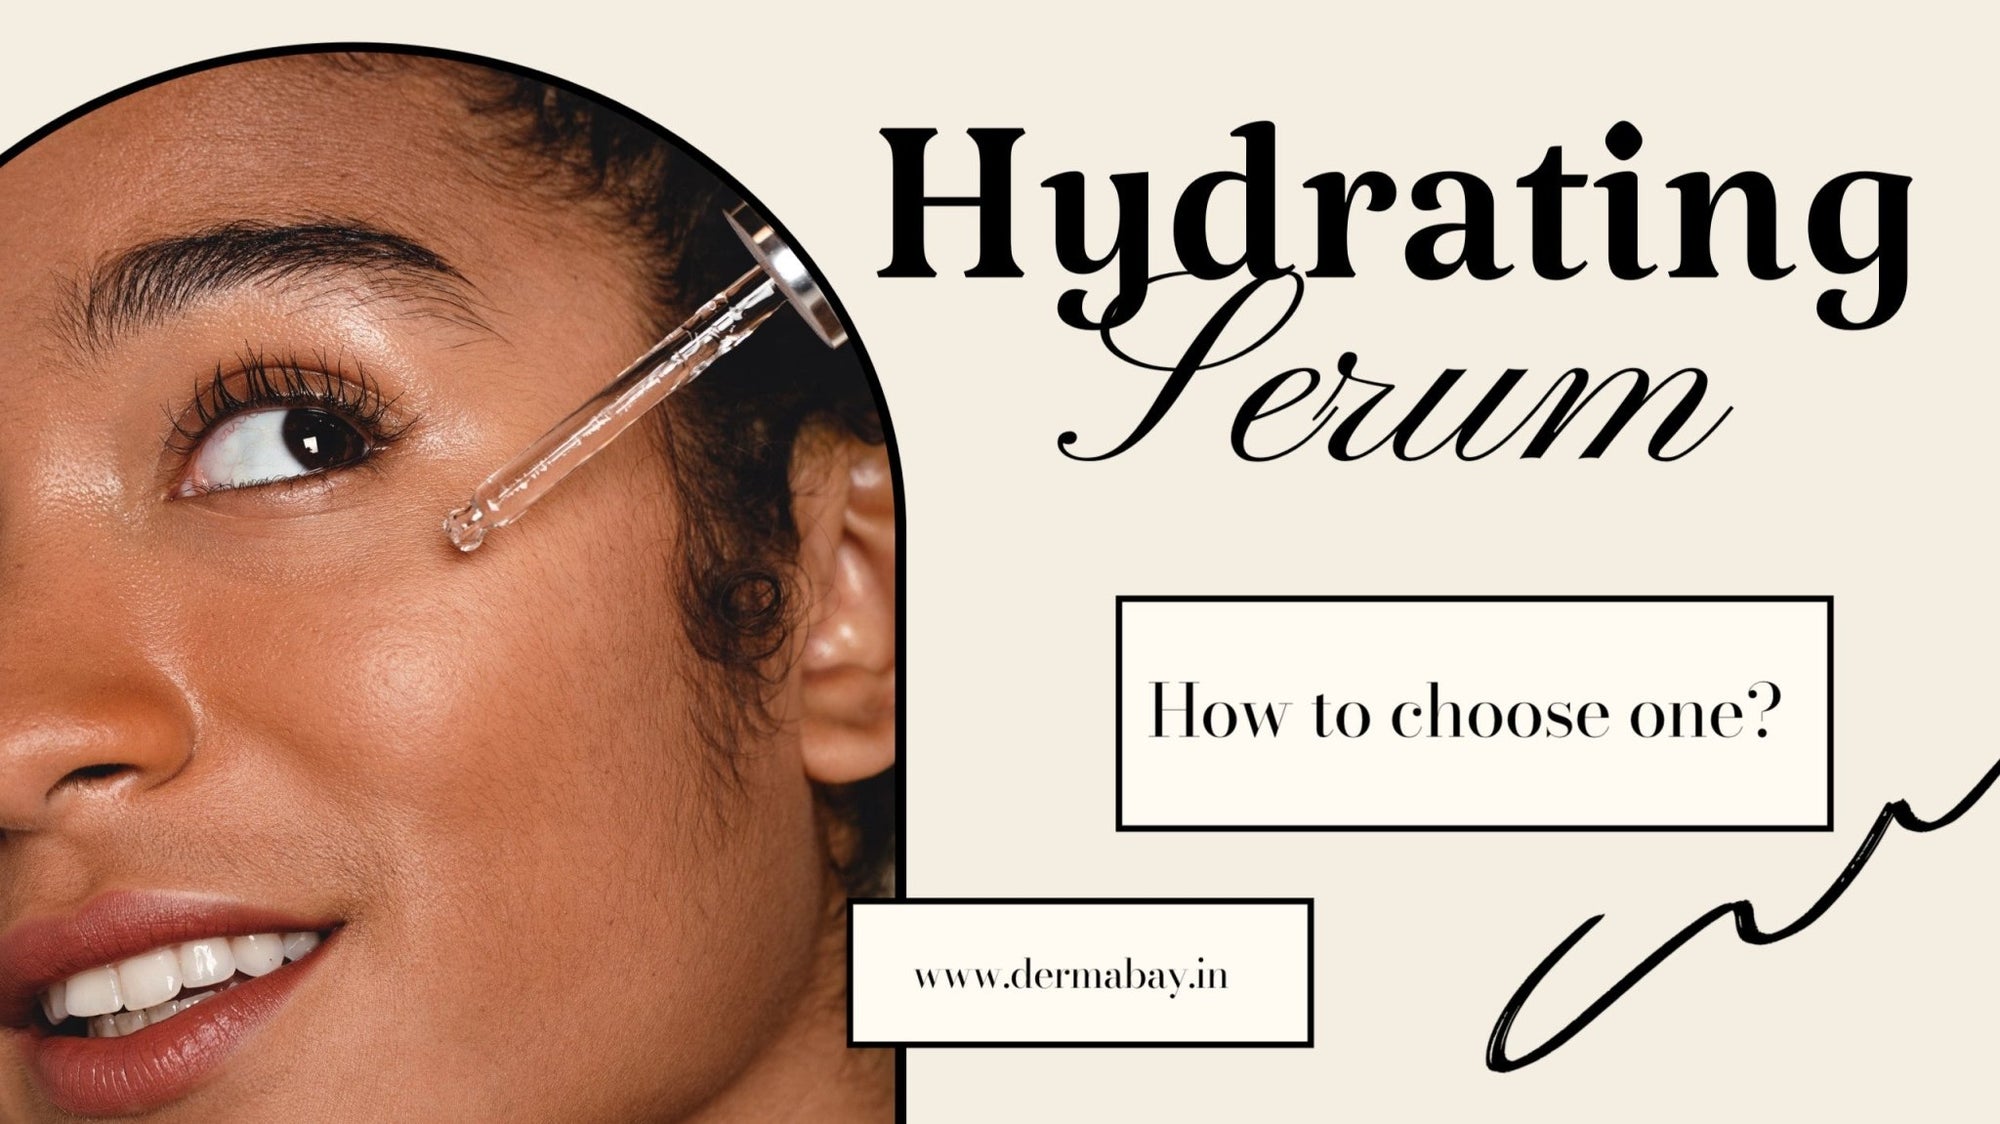 How Do I Choose a Hydrating Serum? - Dermabay